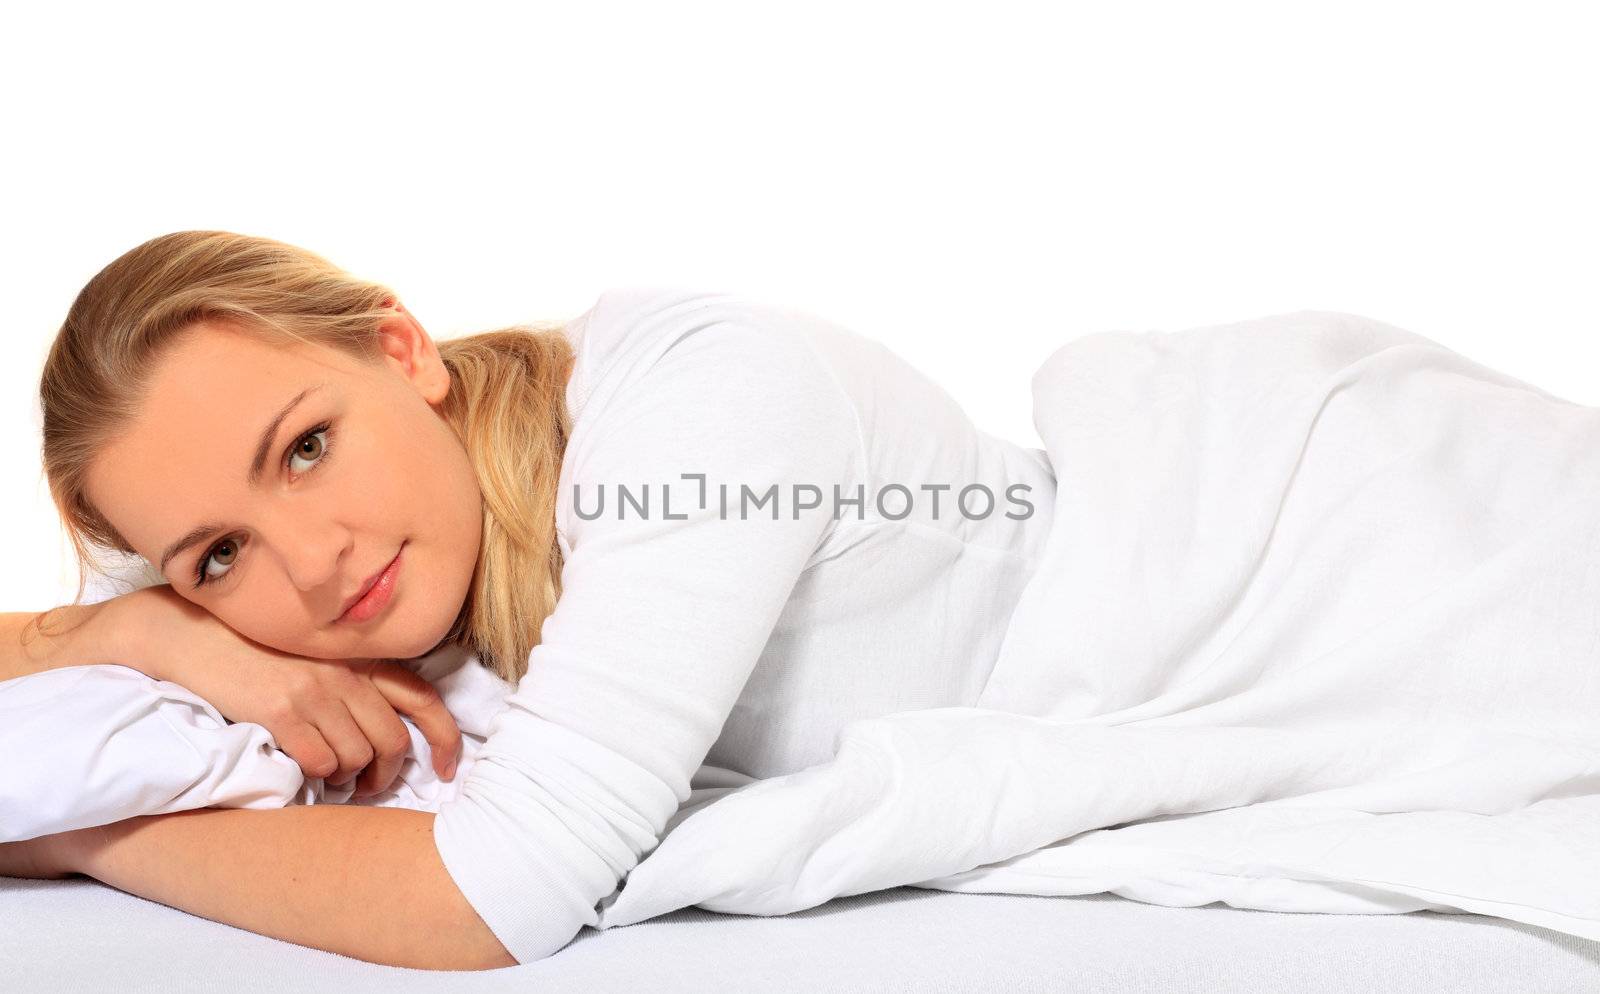 Attractive blond woman lying in bed. All on white background.